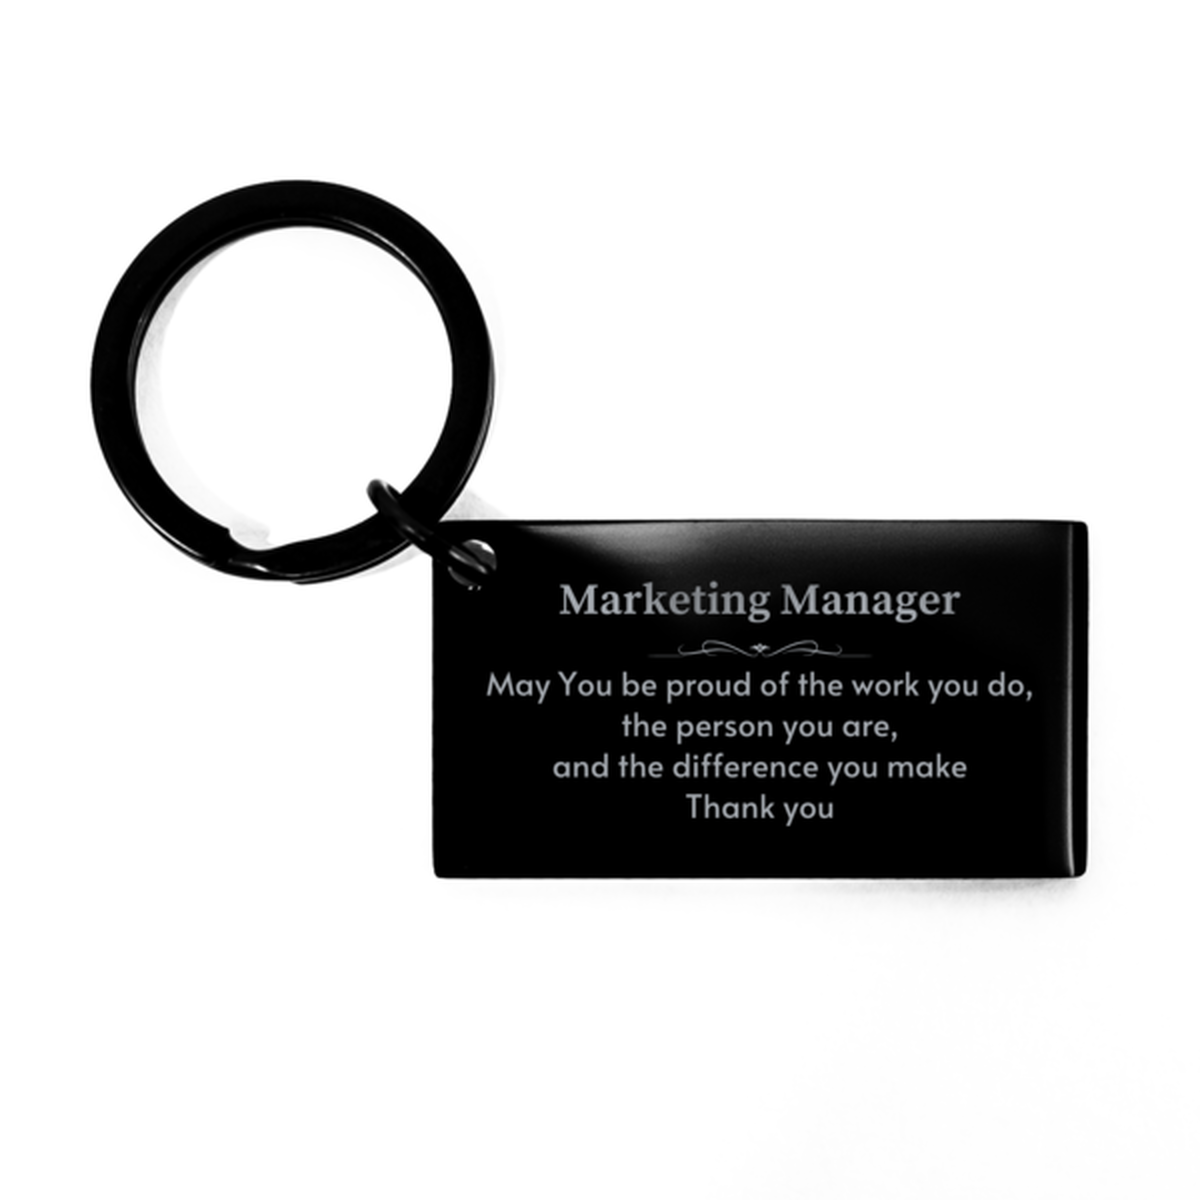 Heartwarming Keychain Retirement Coworkers Gifts for Marketing Manager, Office Clerk May You be proud of the work you do, the person you are Gifts for Boss Men Women Friends